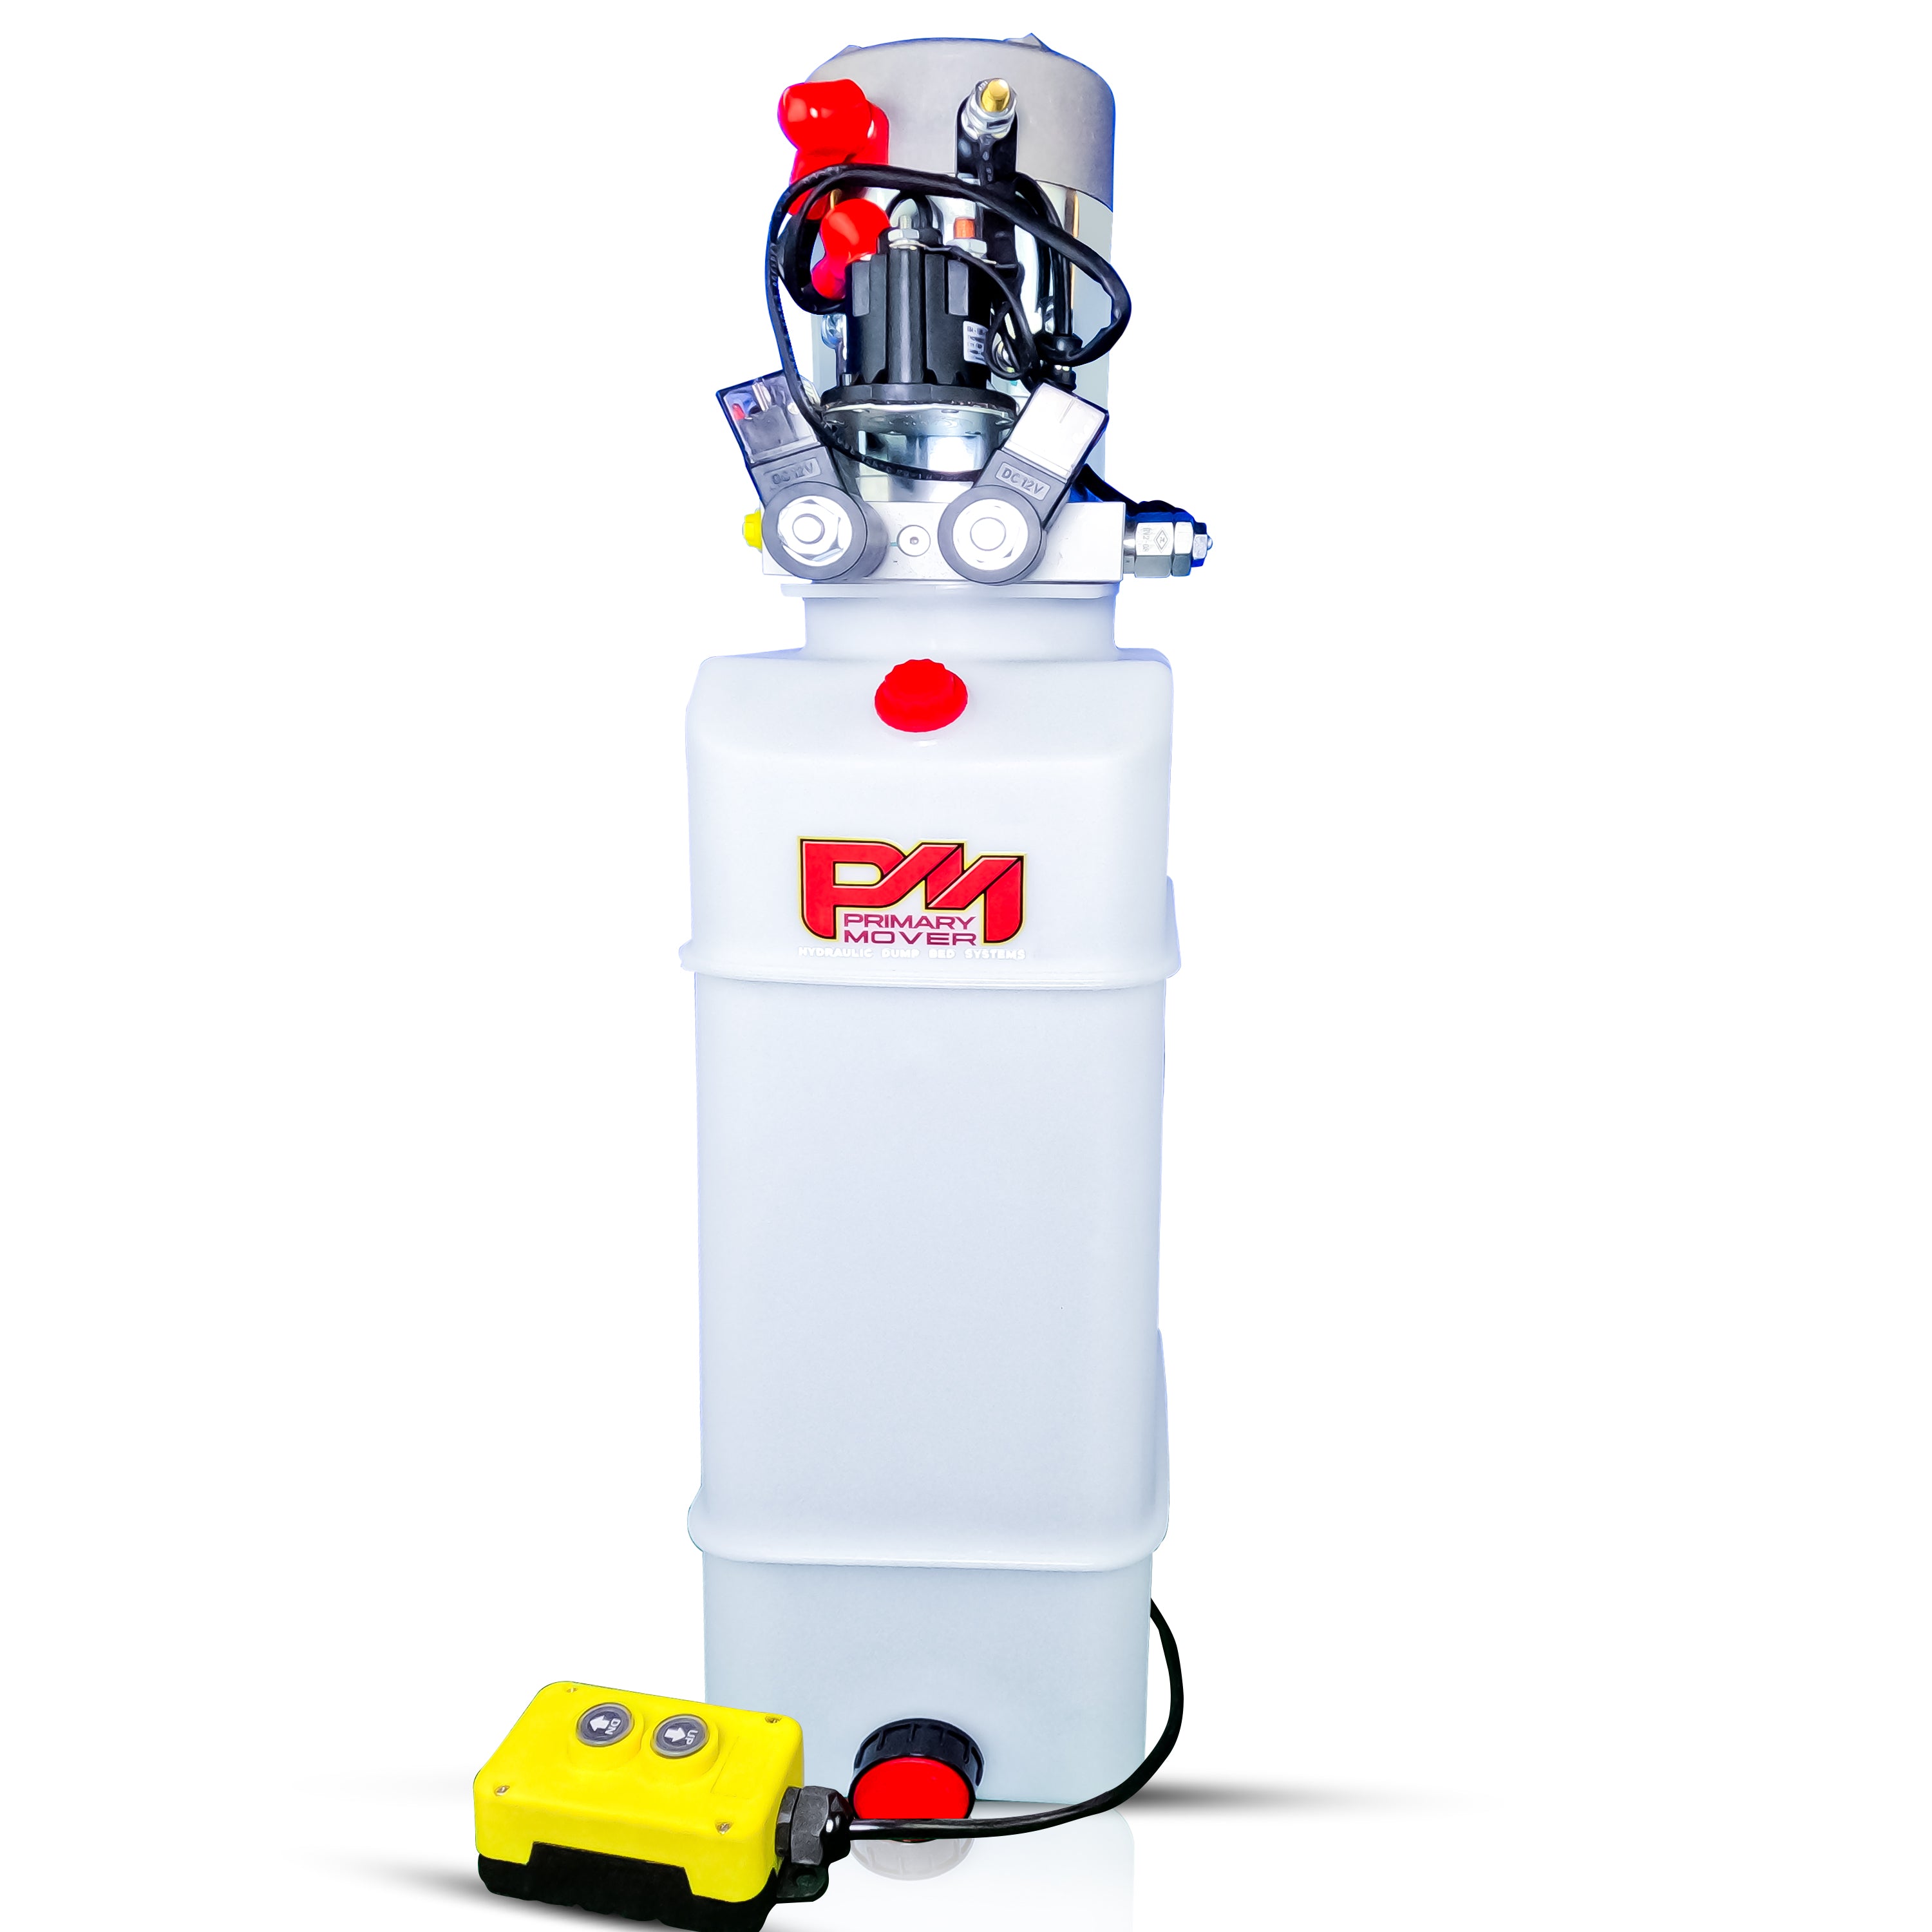 Primary Mover 12V Double-Acting Hydraulic Pump - Precision-crafted for hydraulic dump bed systems, offering dual-acting functionality and exceptional value.